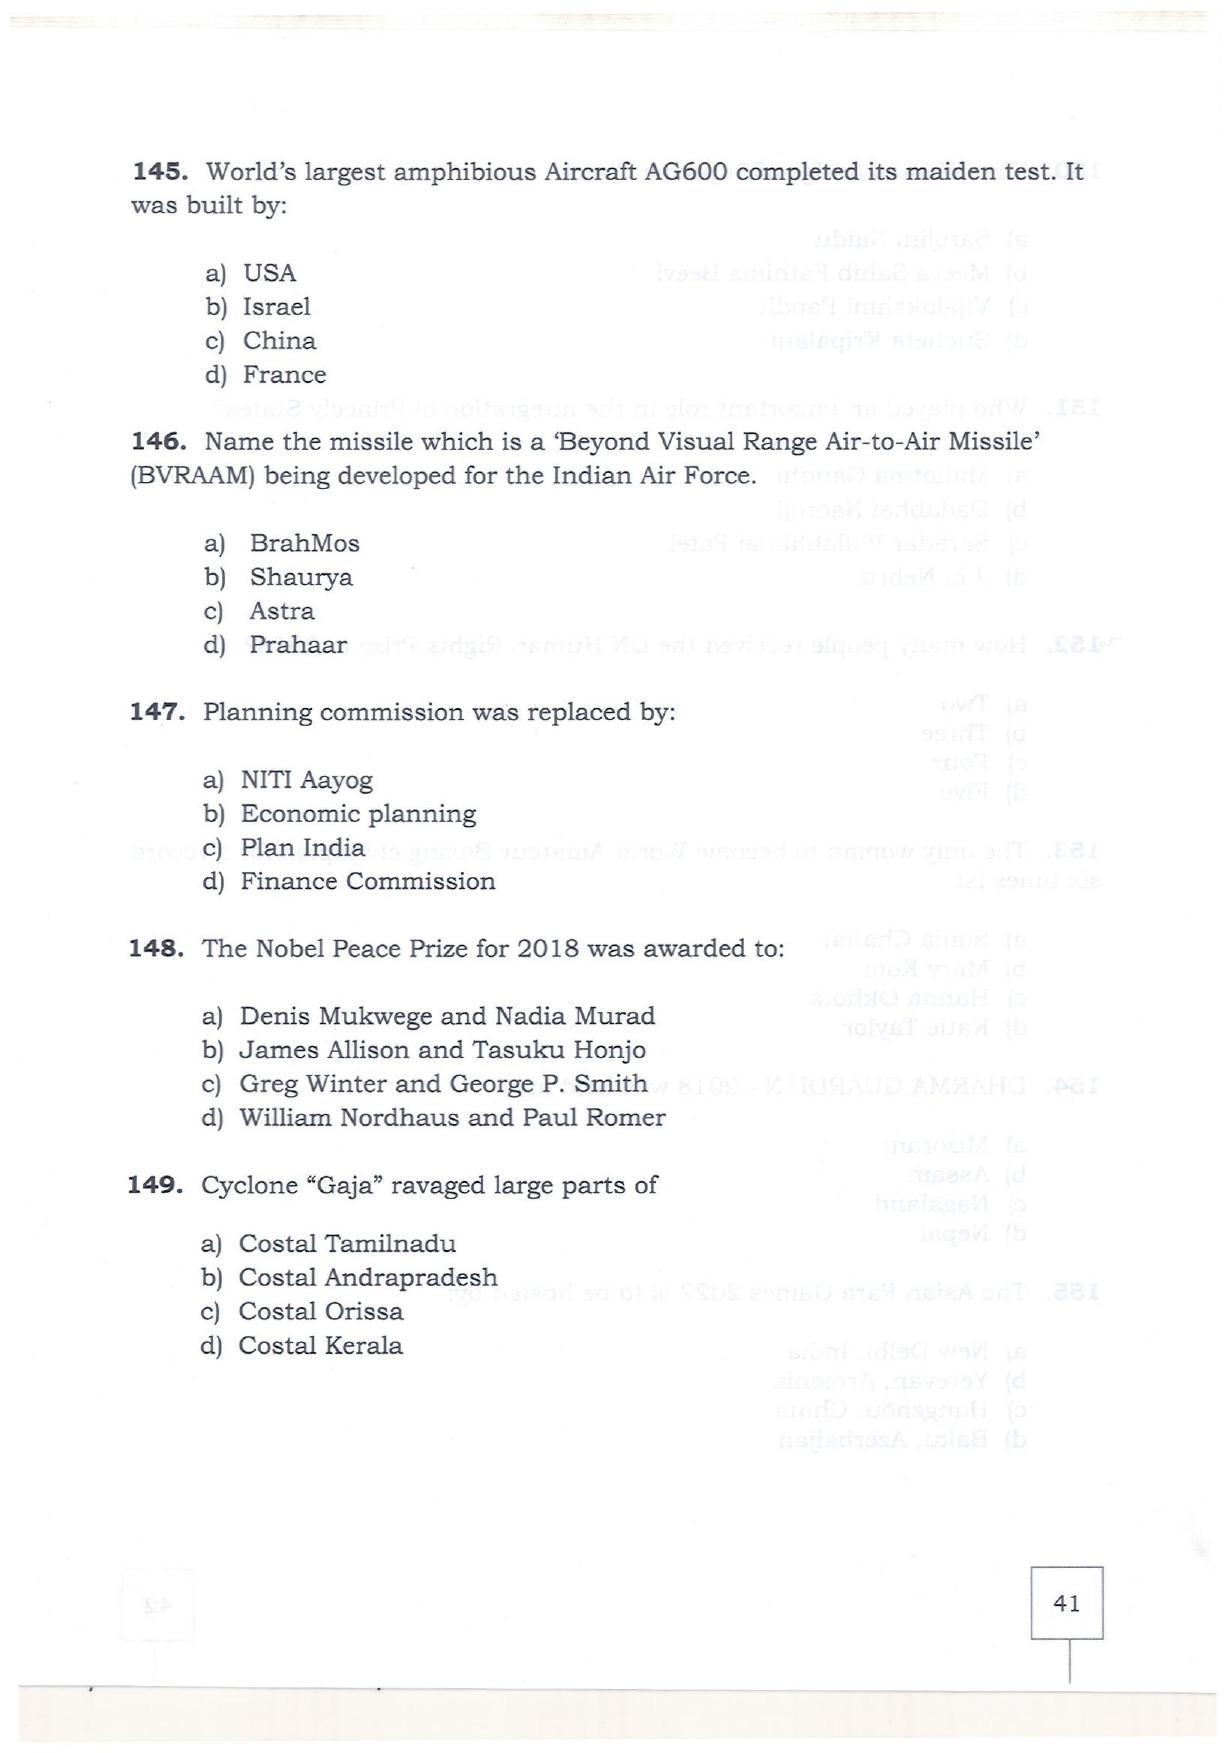 KMAT Question Papers - February 2019 - Page 39